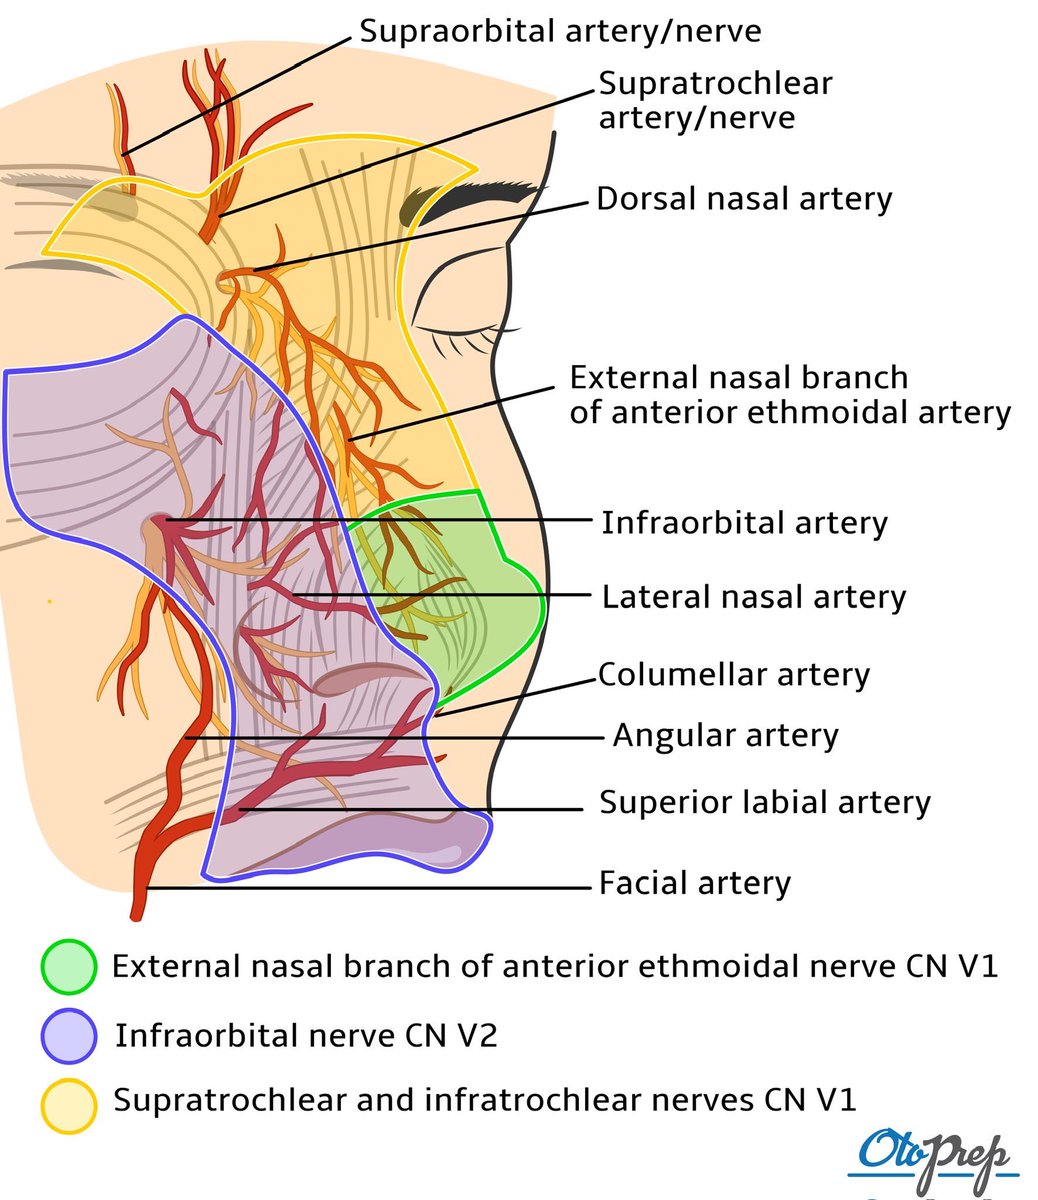 🌟 Dive into facial anatomy with #OtoPrep for ENT mastery! Mastering arteries & nerves is crucial for rhinoplasty & reconstructions. How do they impact your exams & surgeries? Share your insights! 💡 #ENTprep #SurgicalAnatomy #Rhinoplasty #MedEd #FutureSurgeons #MedicalEducation